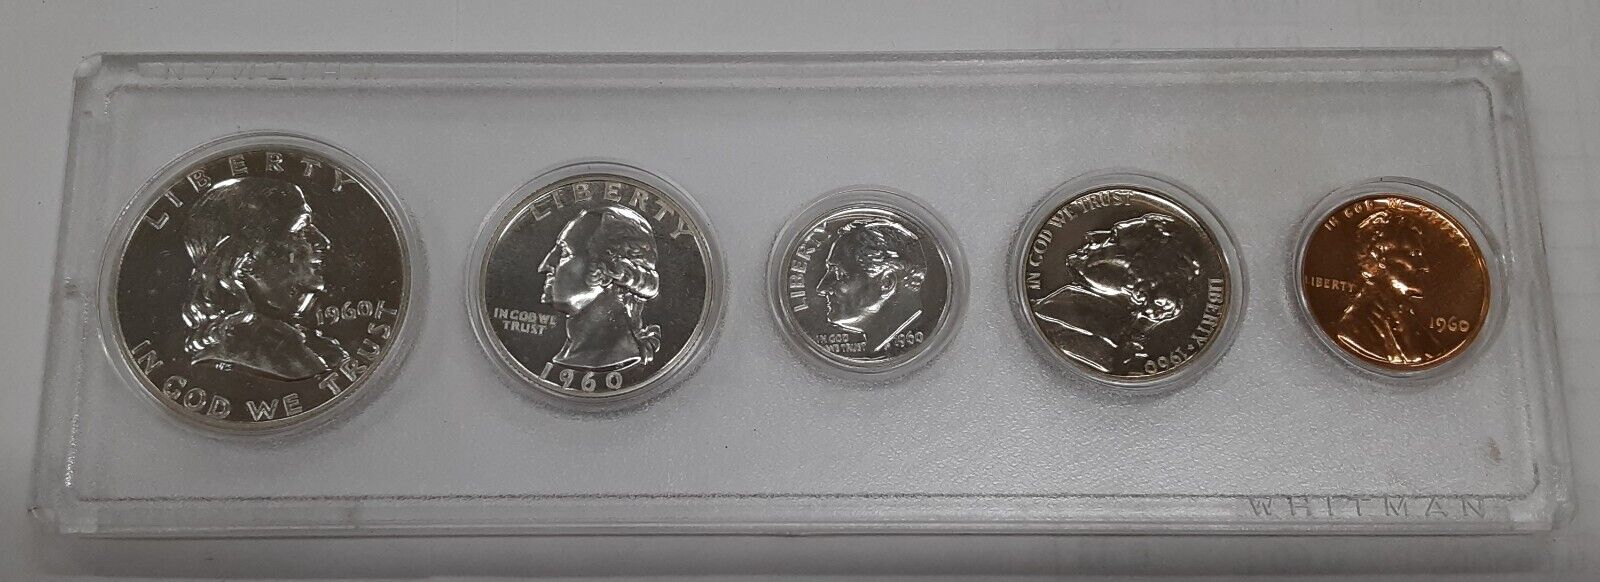 1960 US Mint Silver Proof Set 5 Gem Coins in Whitman Holder